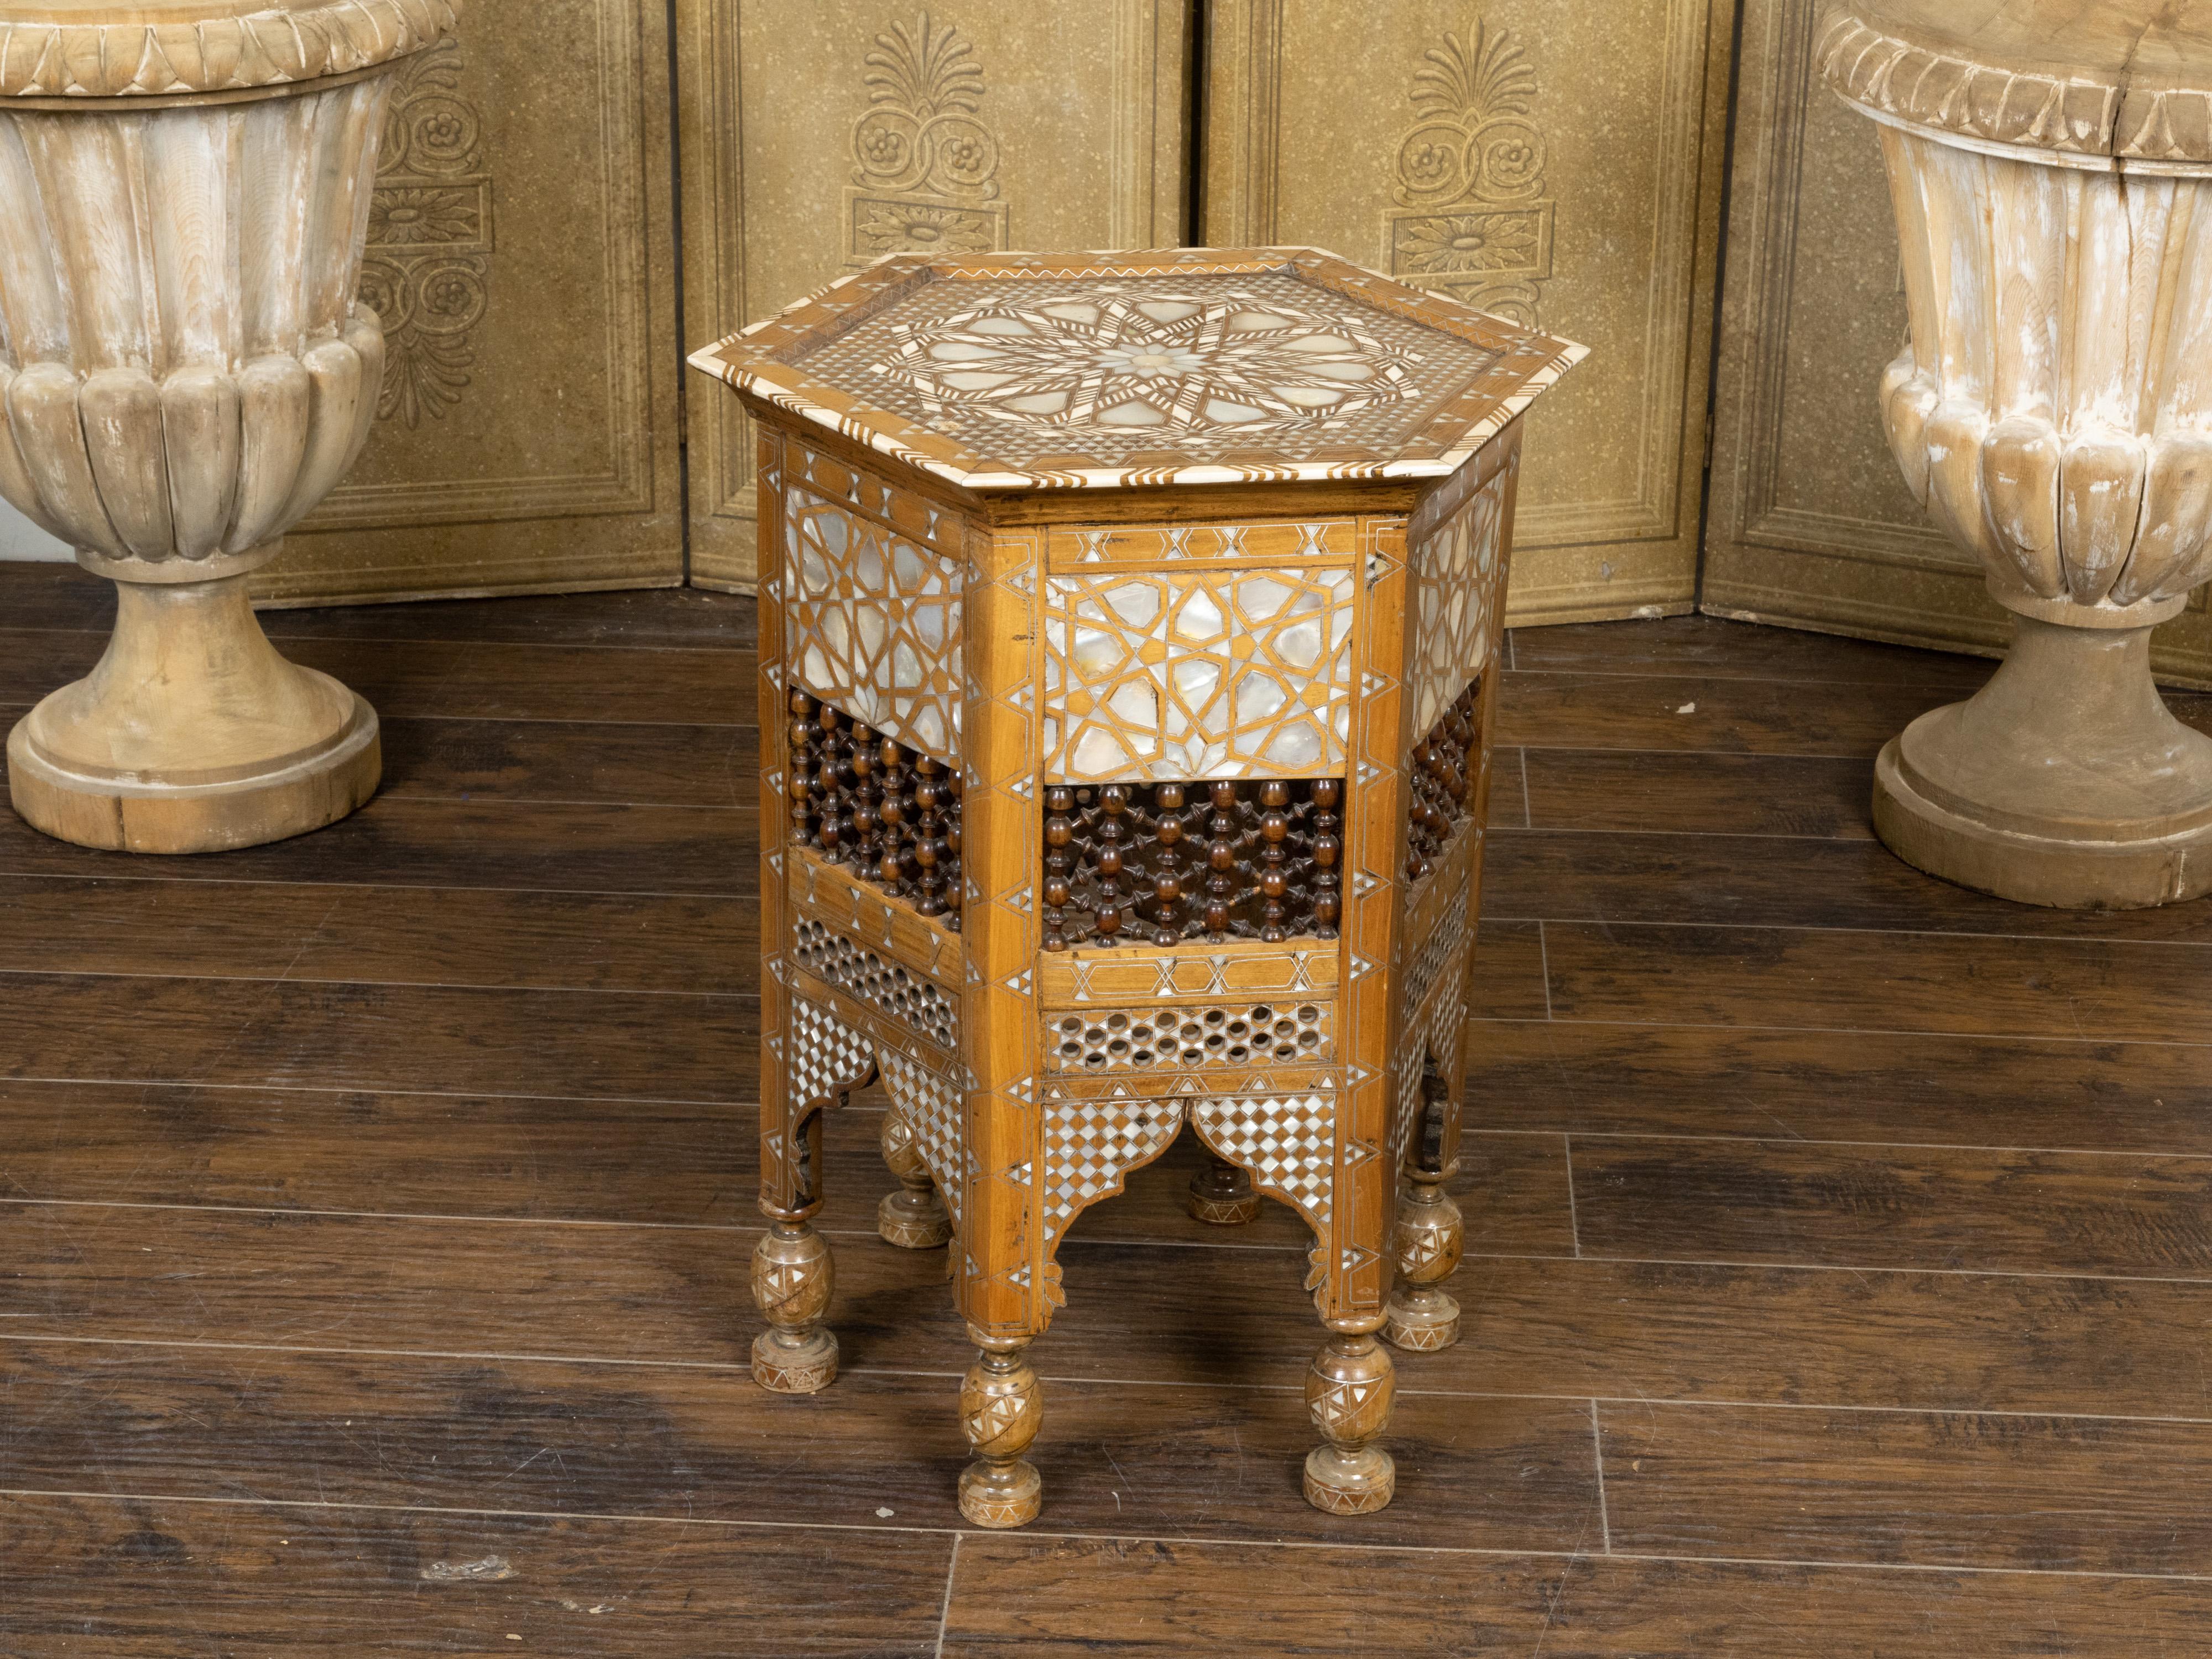 Turned Moroccan Moorish Style 1920s Table with Hexagonal Top and Mother of Pearl Inlay